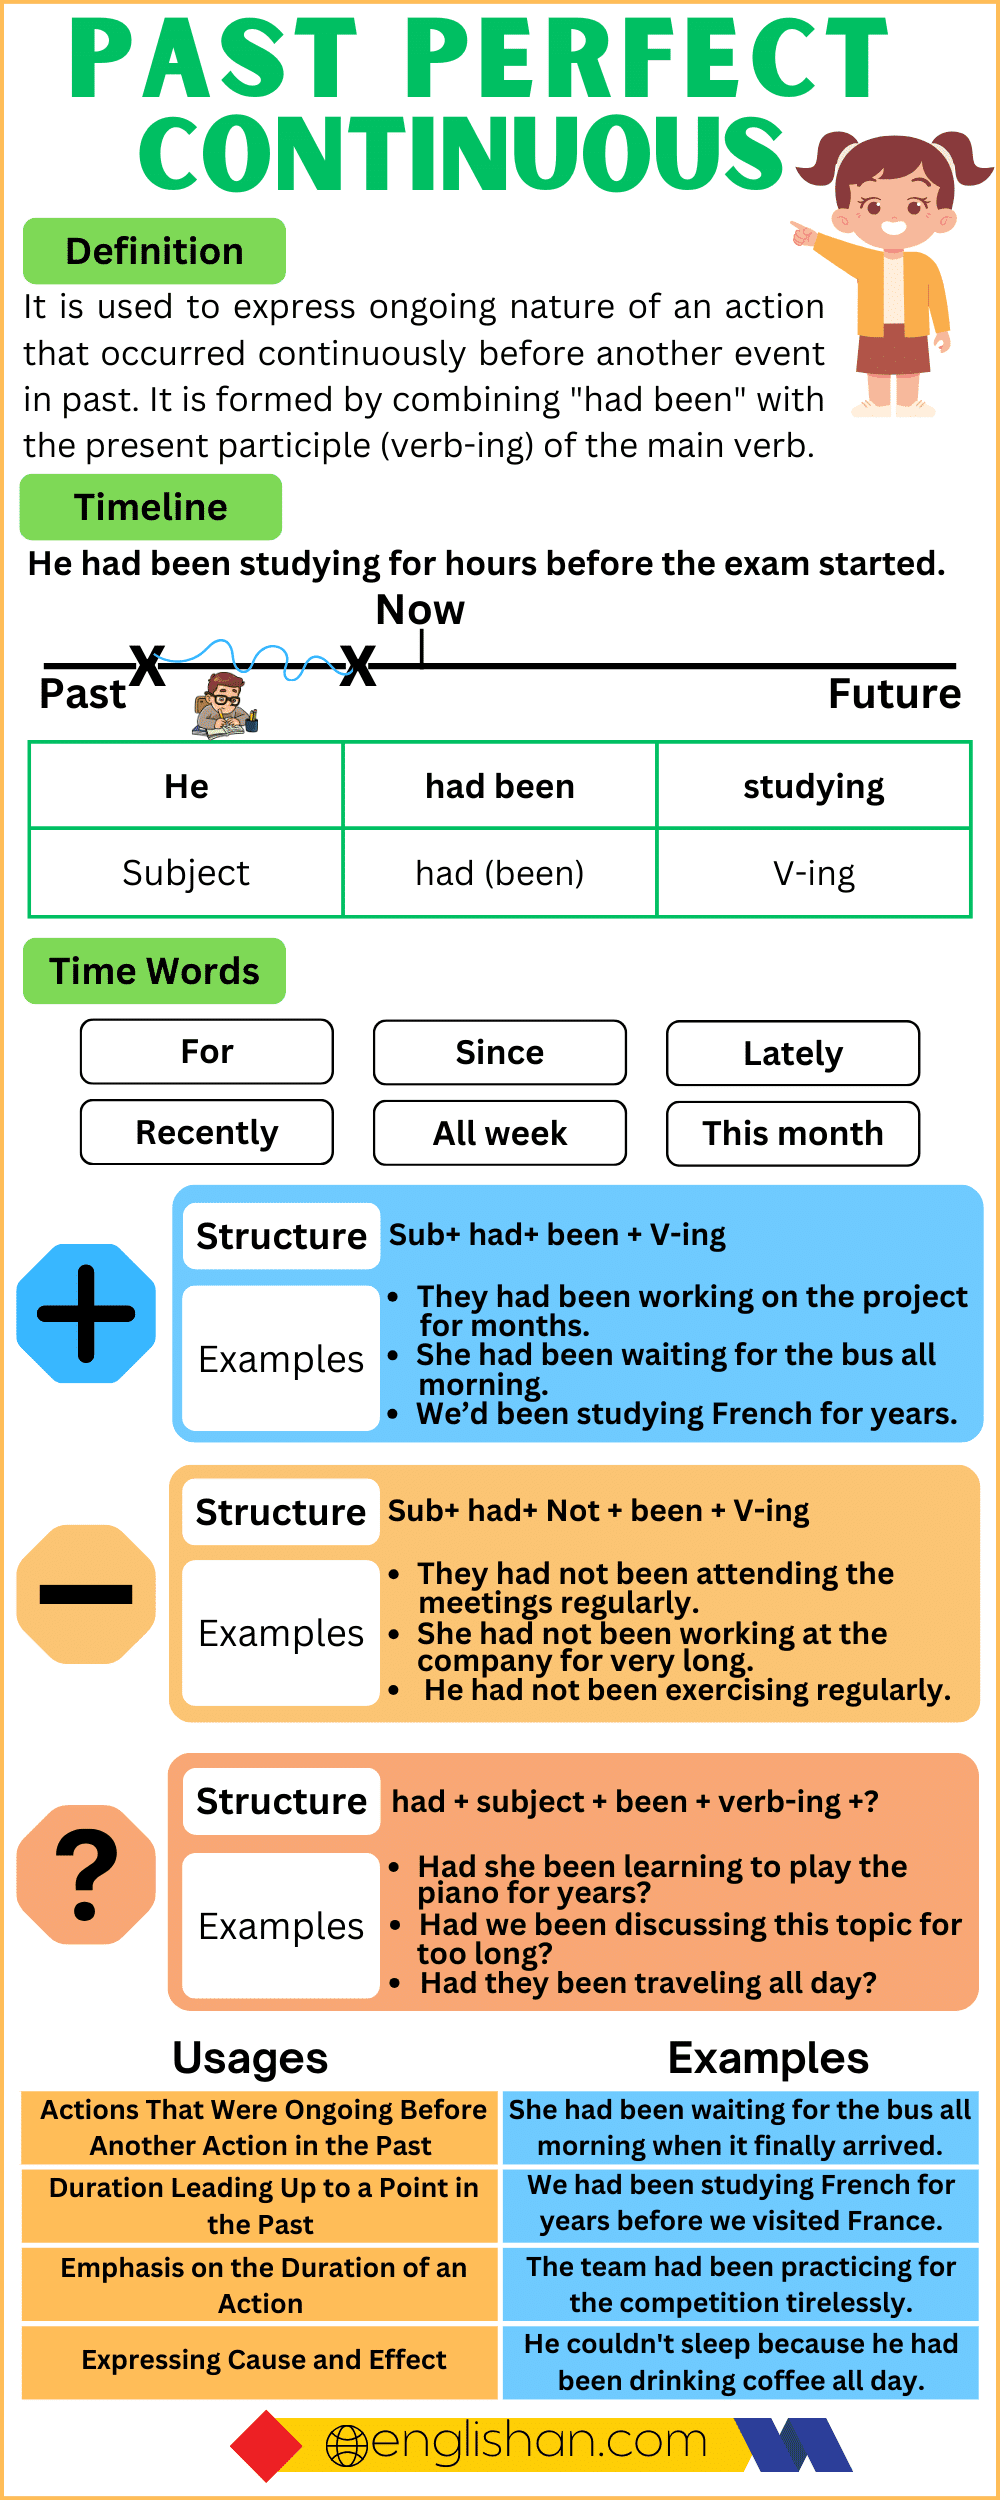 Past Perfect Continuous Tense Chart with Definition, Rules, Structure, Usages, Example Sentences